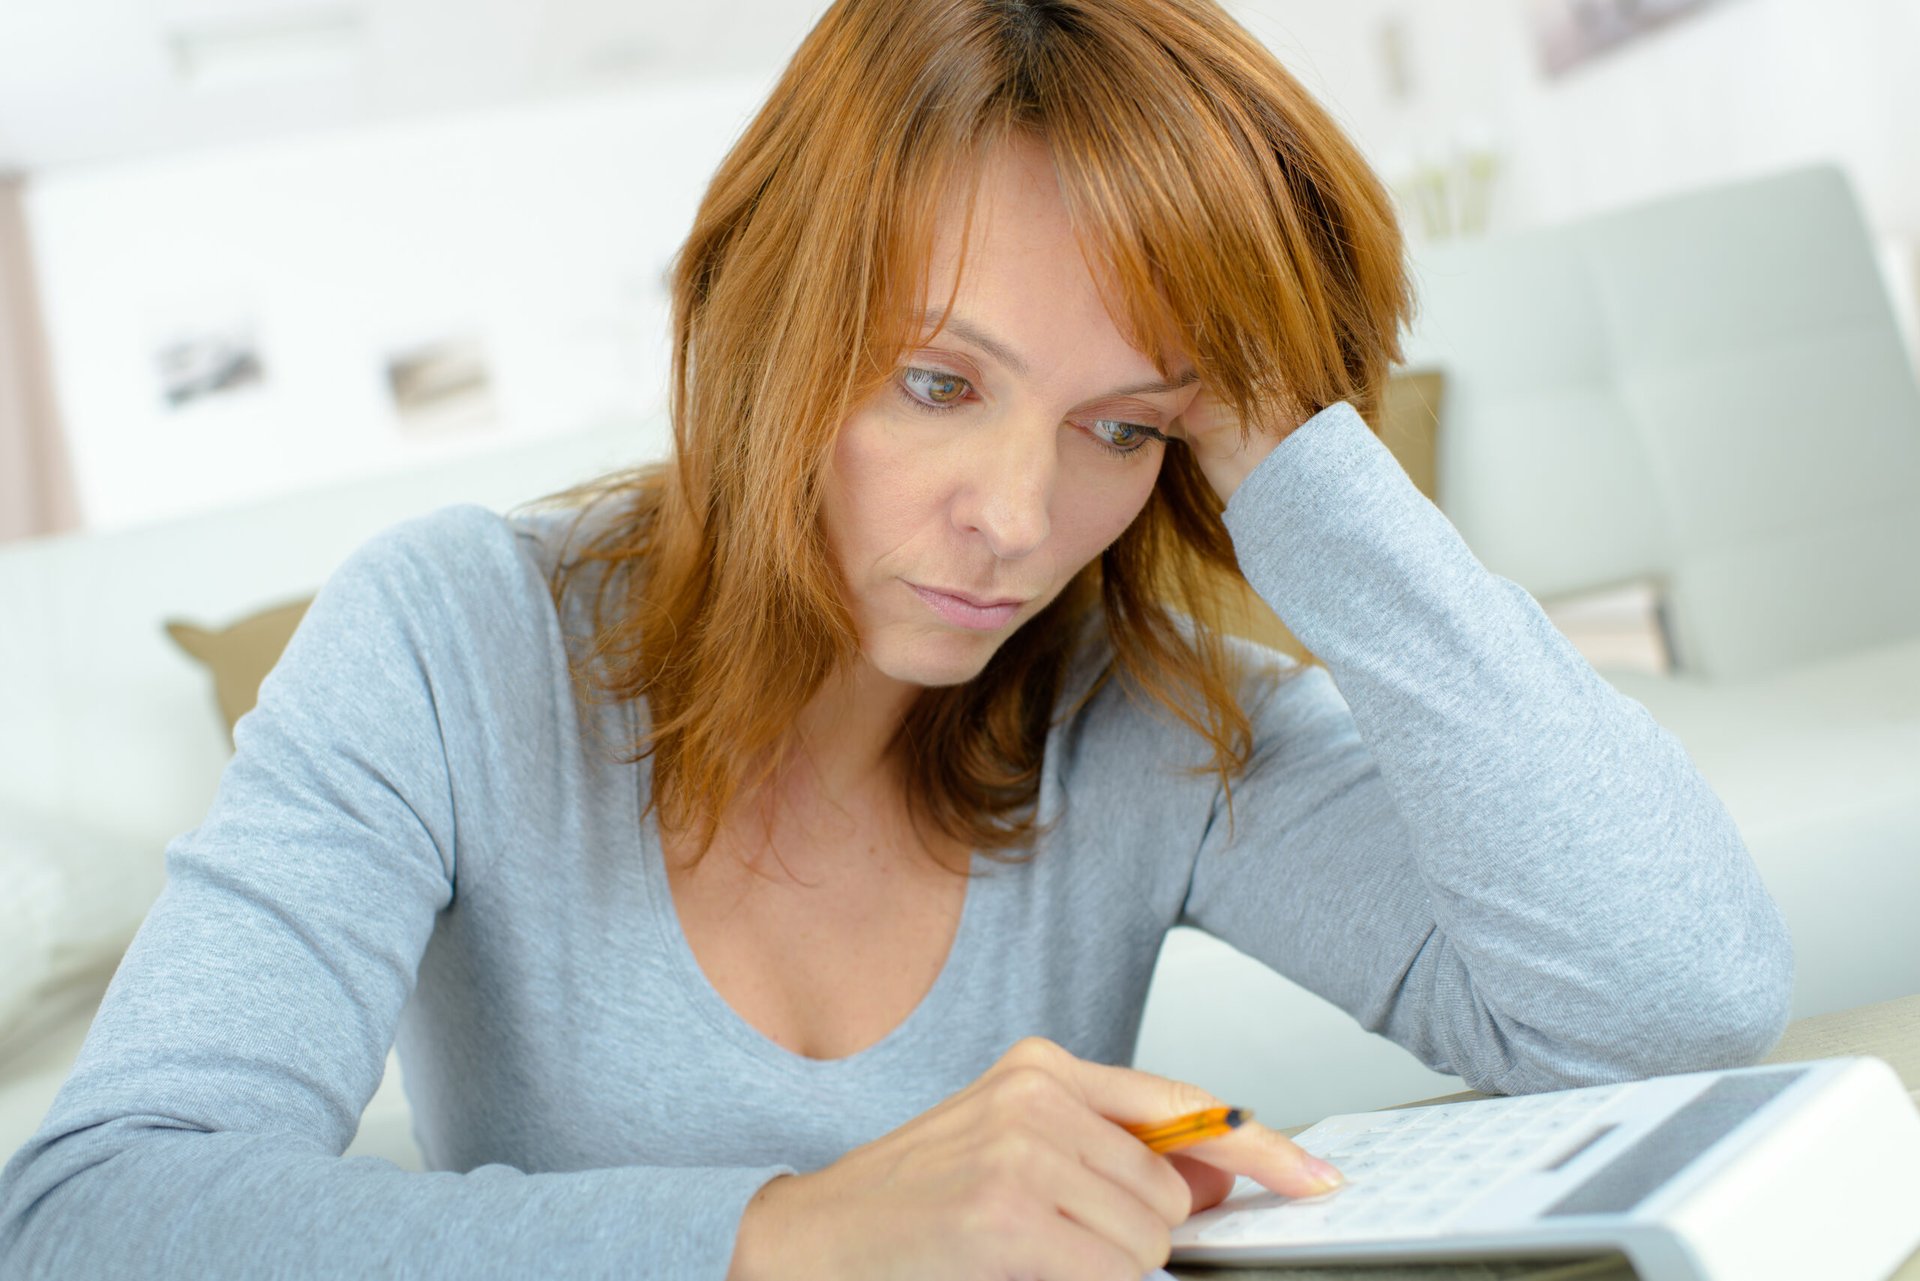 Stressed woman calculating income or expenses